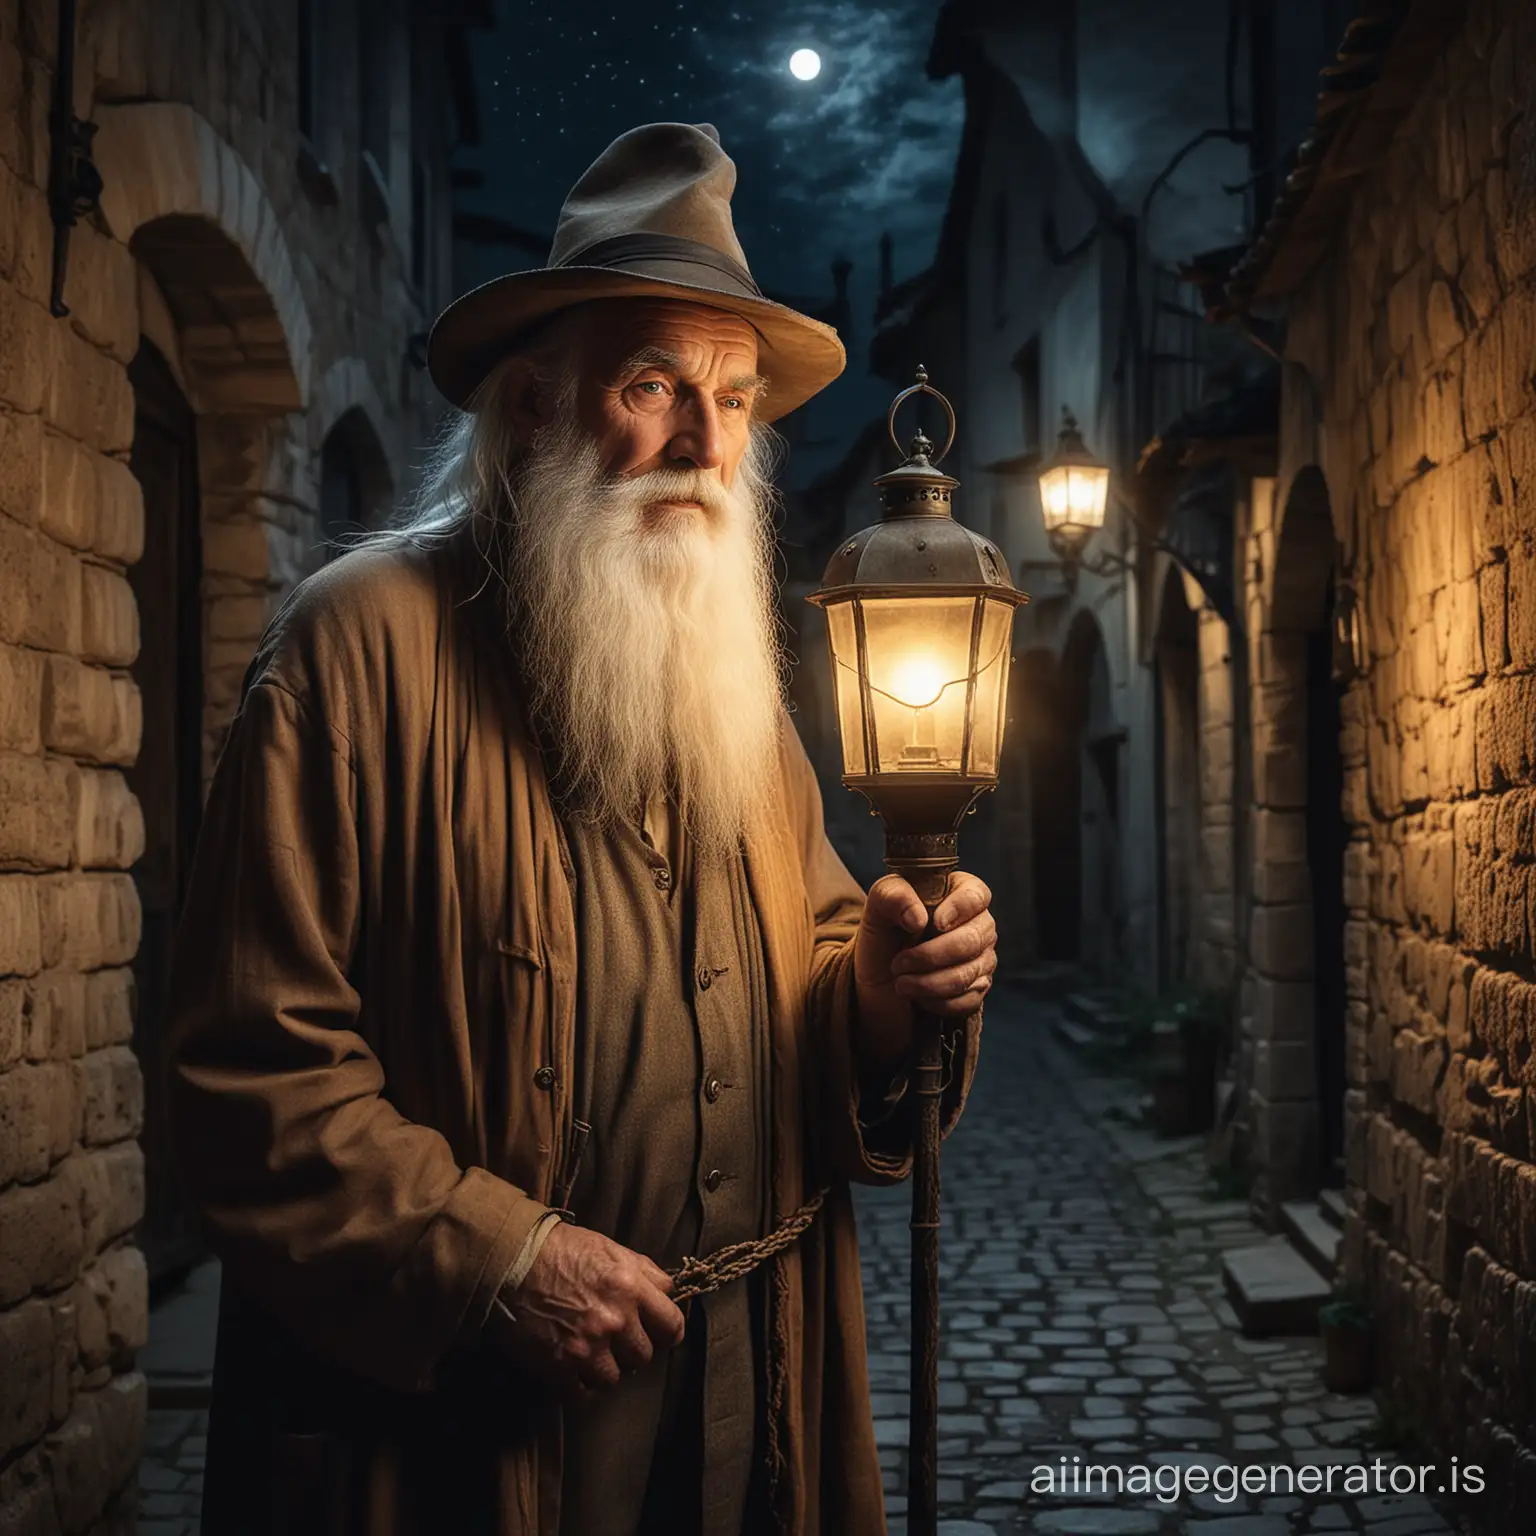 An old tall man, wearing a hat, with a long white beard, holding in his hand an old lamp lit in the night, in an alley of a medieval village in 1930, colored image